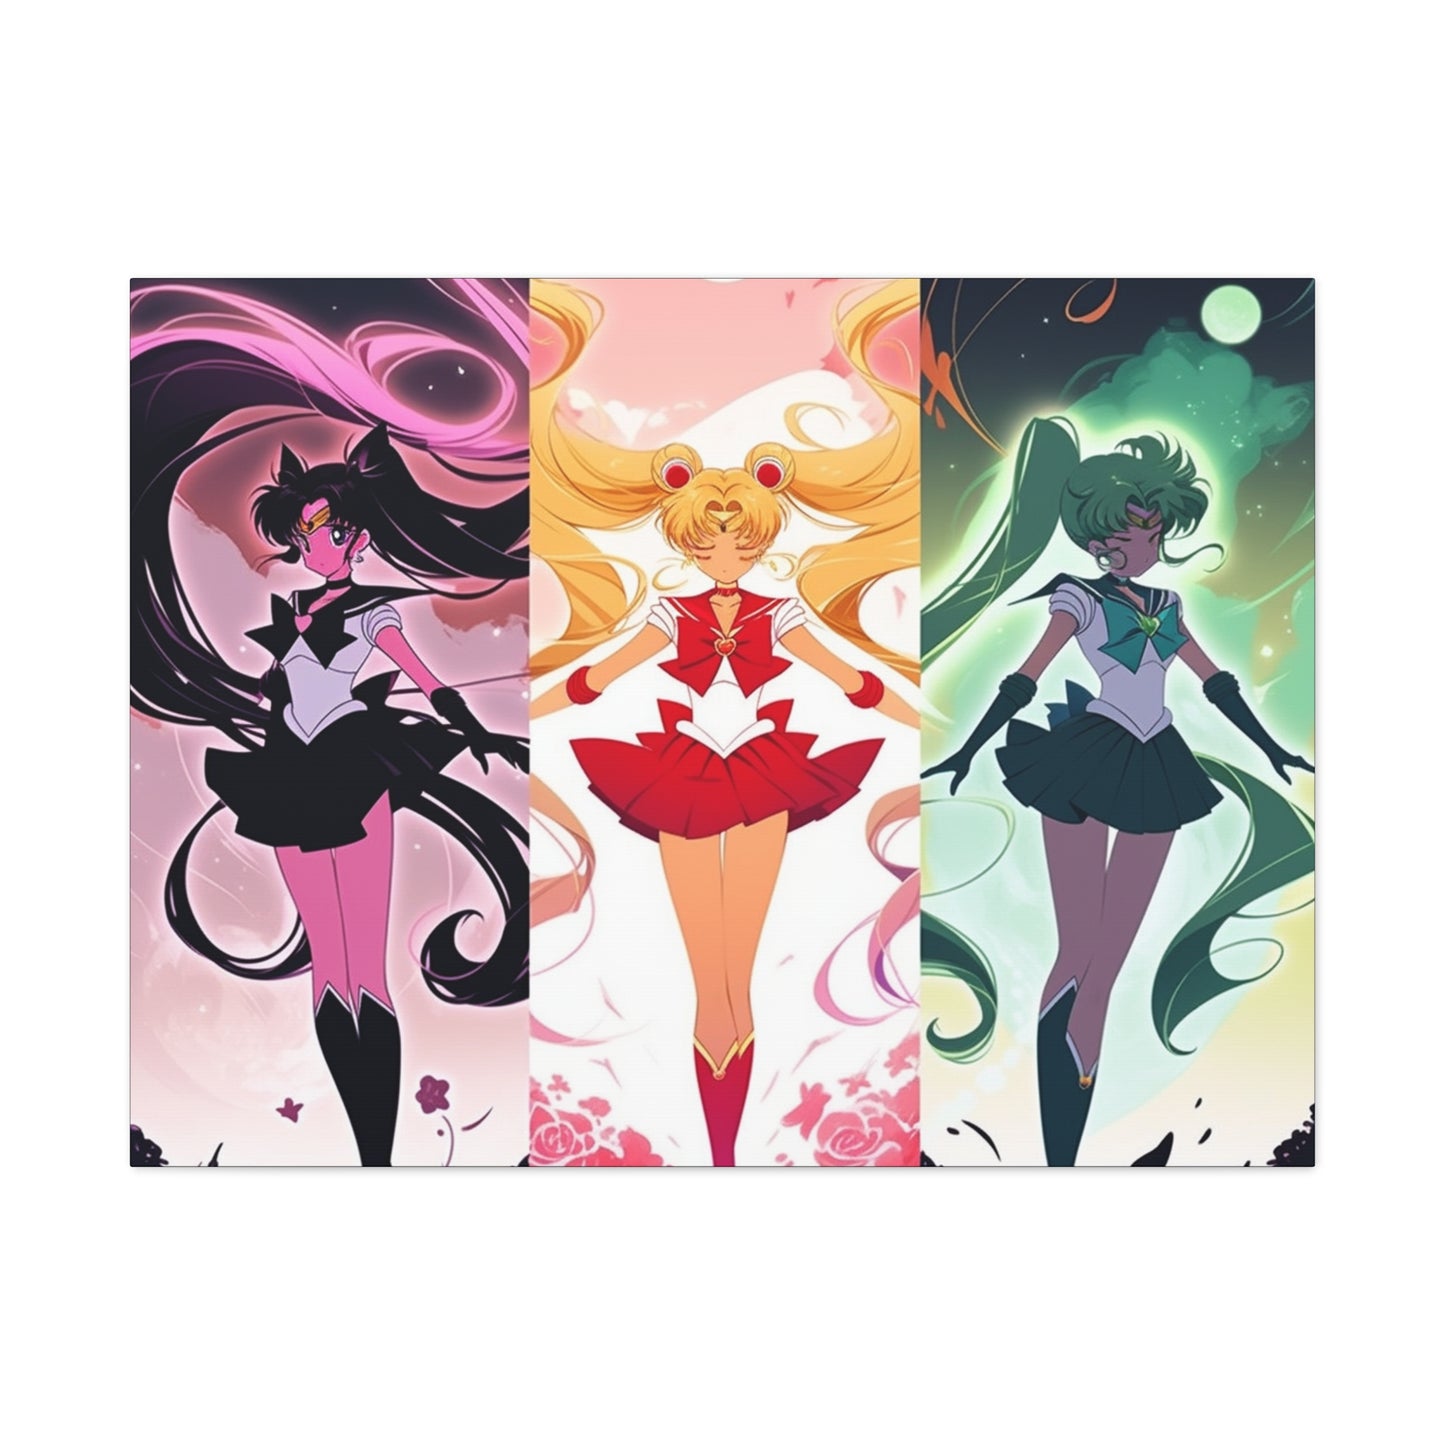 Sailor Scout Wall Canvas